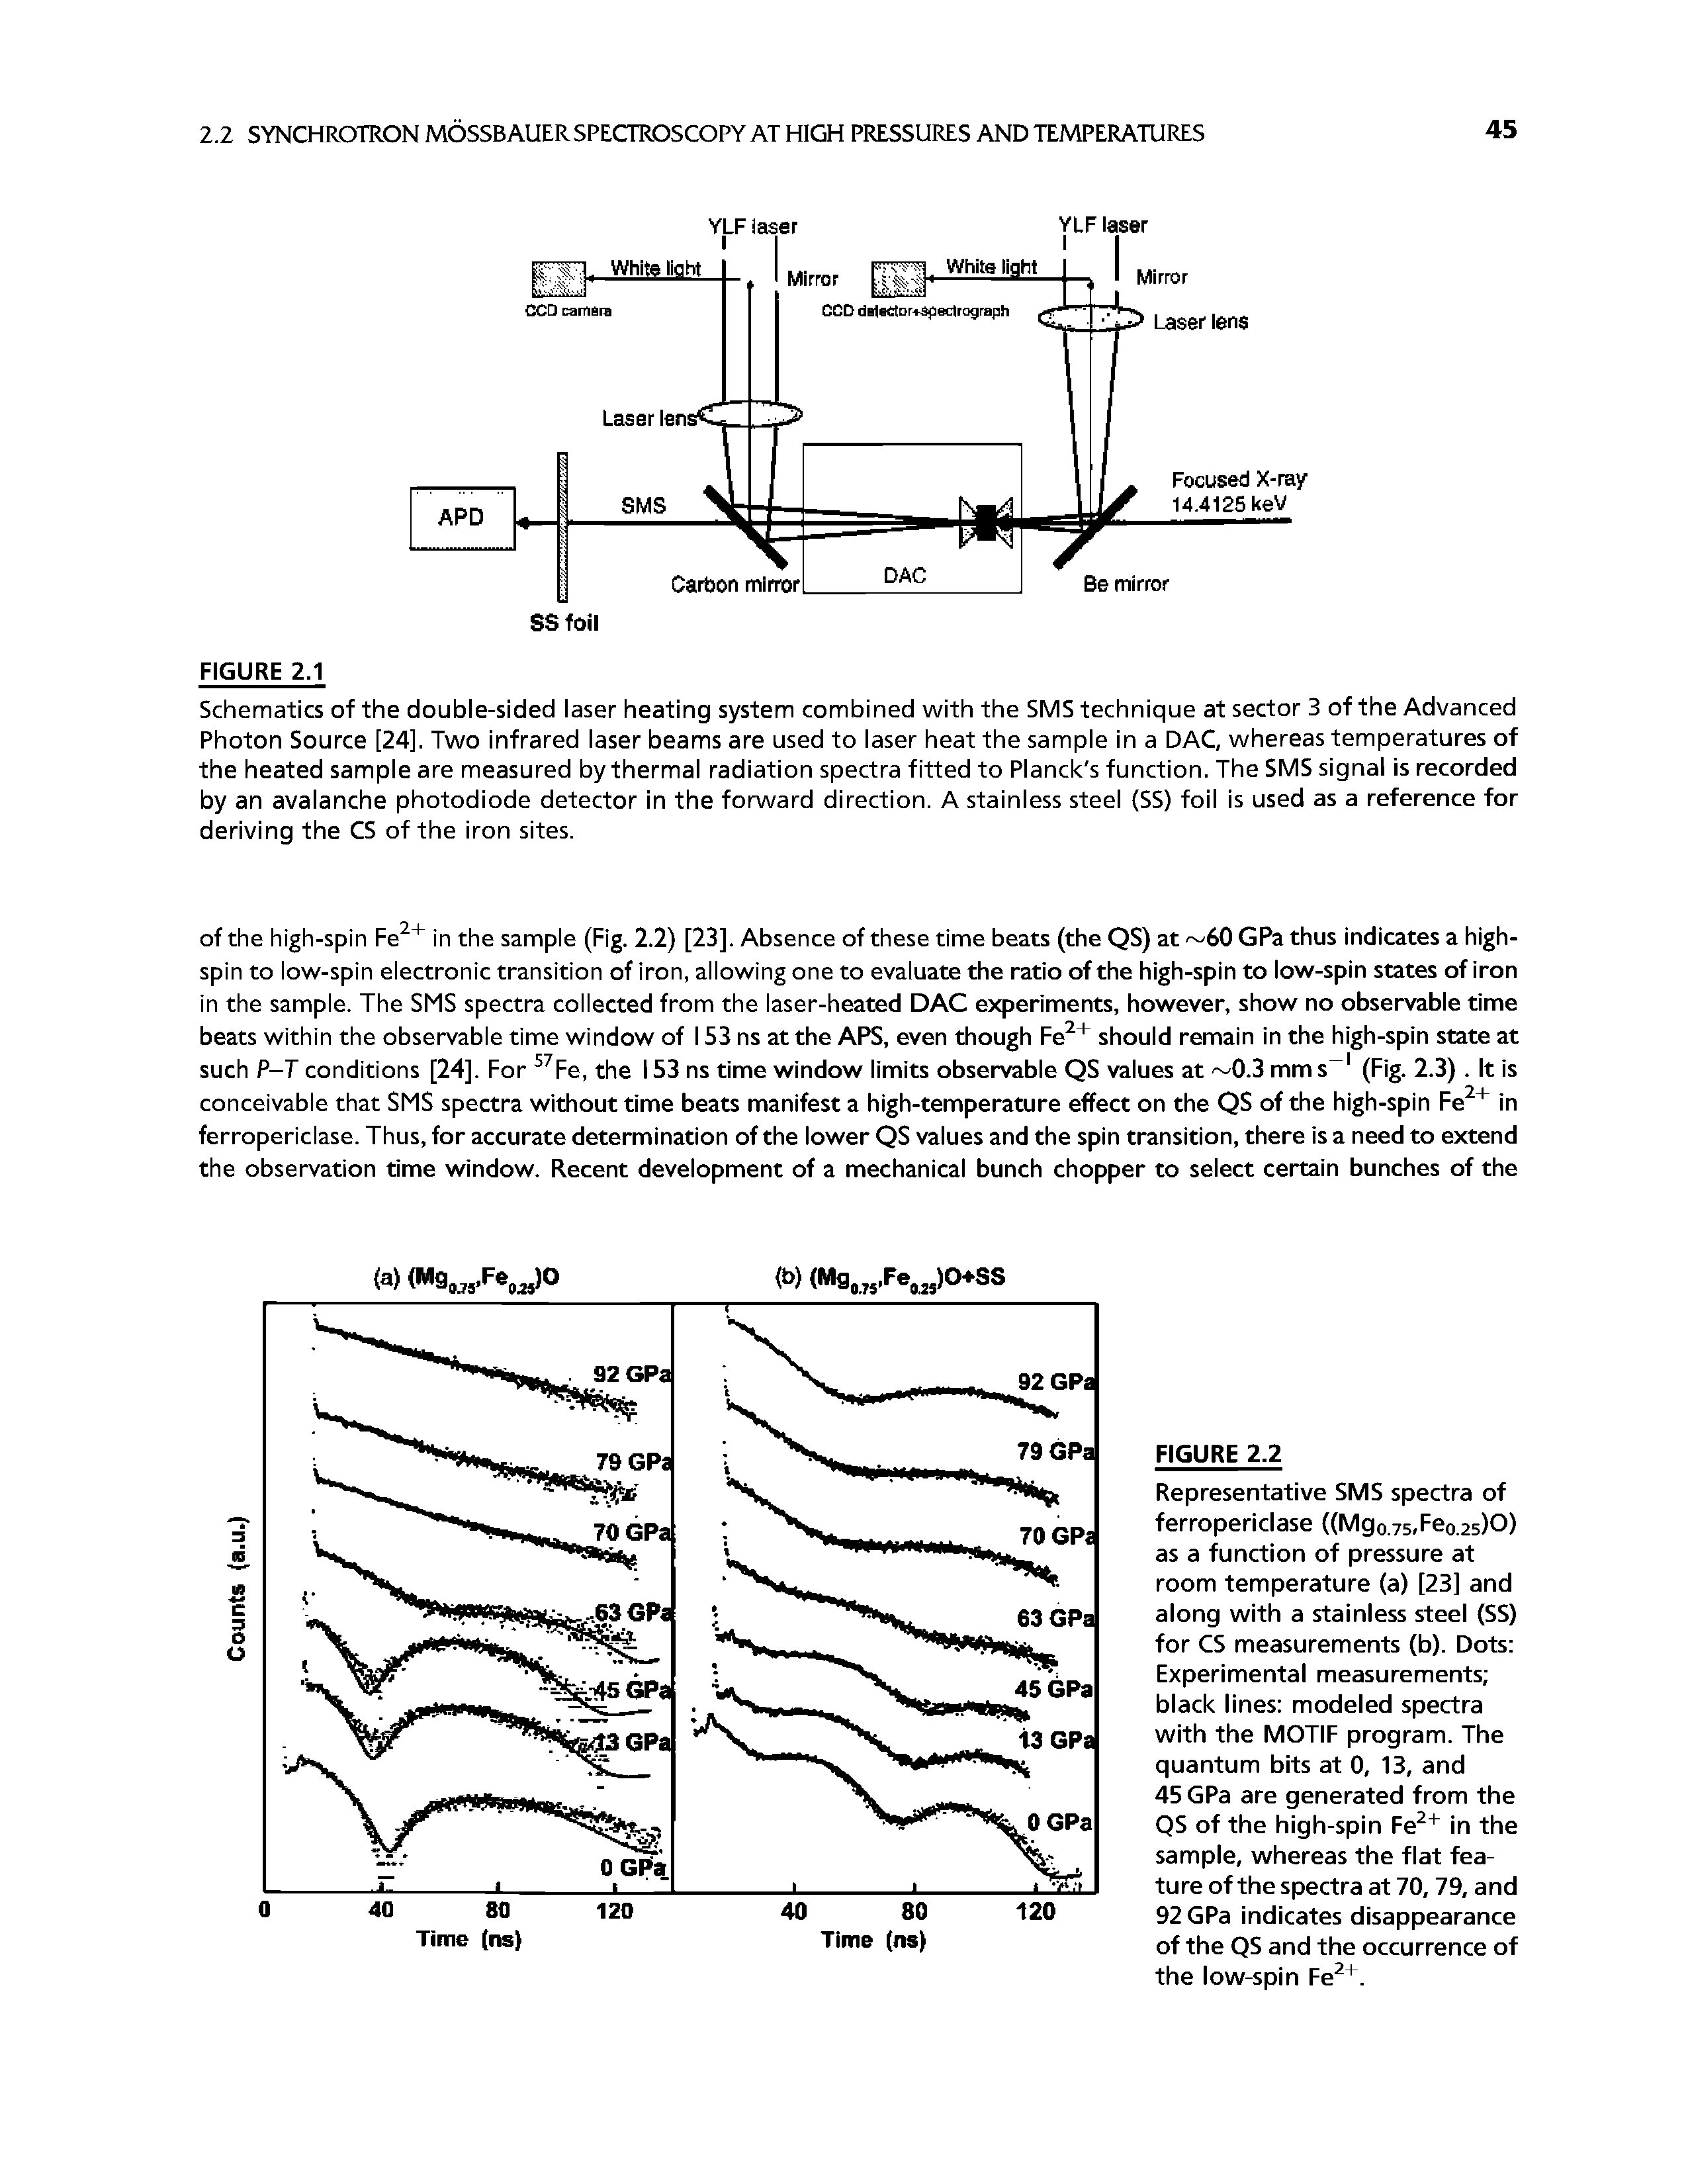 Schematics of the double-sided laser heating system combined with the SMS technique at sector 3 of the Advanced Photon Source [24], Two infrared laser beams are used to laser heat the sample in a DAC, whereas temperatures of the heated sample are measured by thermal radiation spectra fitted to Planck s function. The SMS signal is recorded by an avalanche photodiode detector in the forward direction. A stainless steel (SS) foil is used as a reference for deriving the CS of the iron sites.